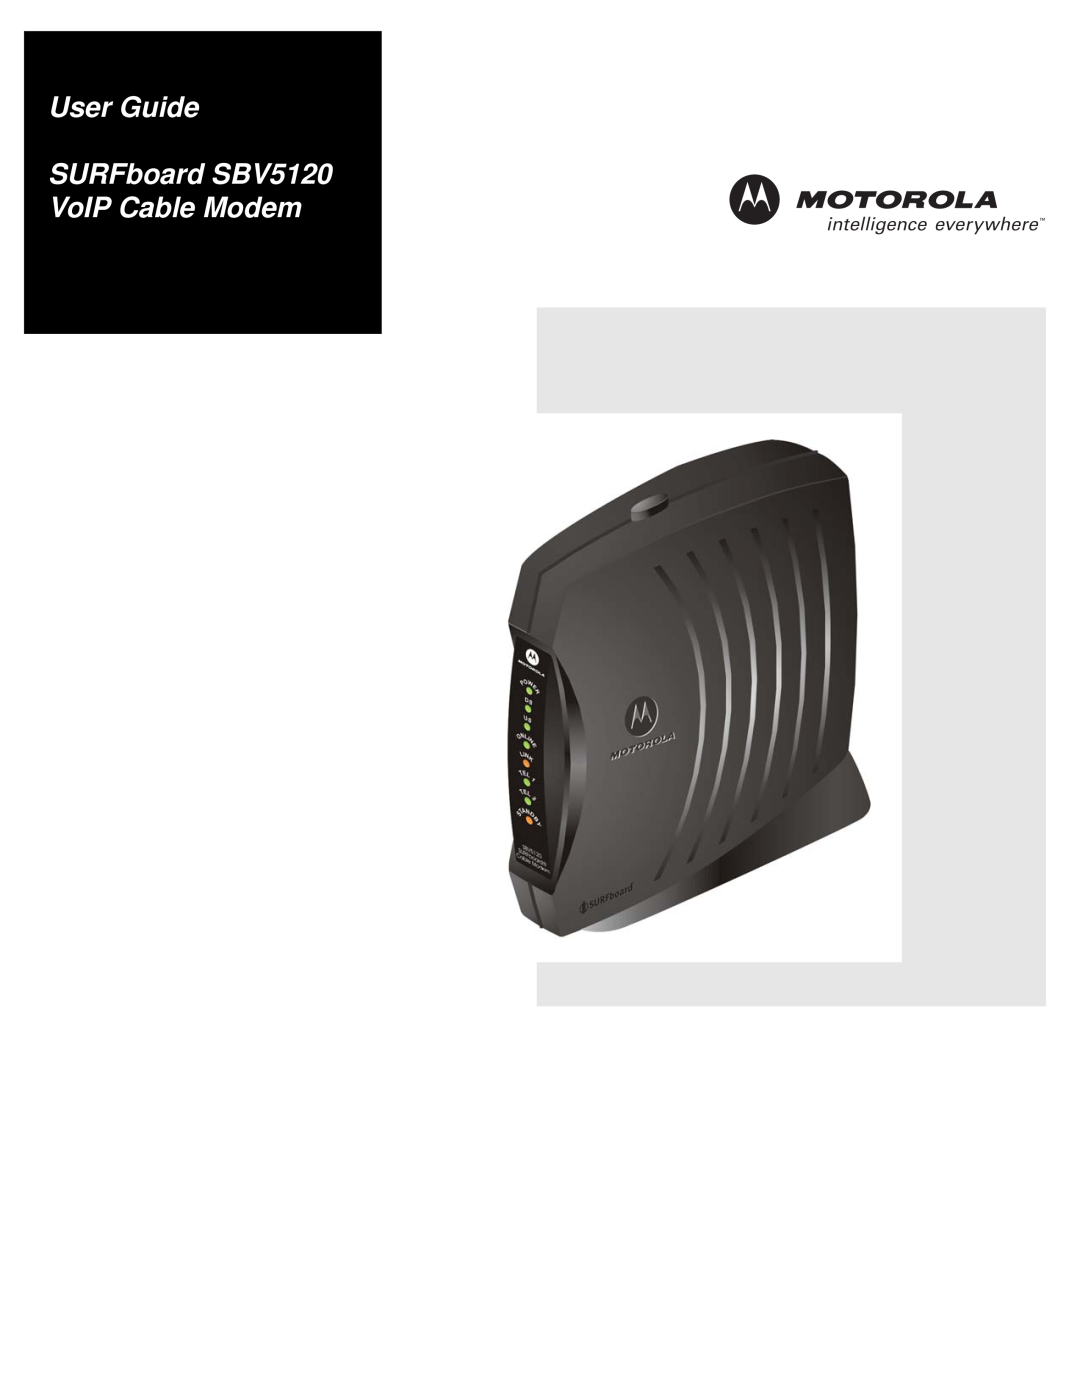 Motorola manual User Guide SBV5120 Series VoIP Cable Modem 